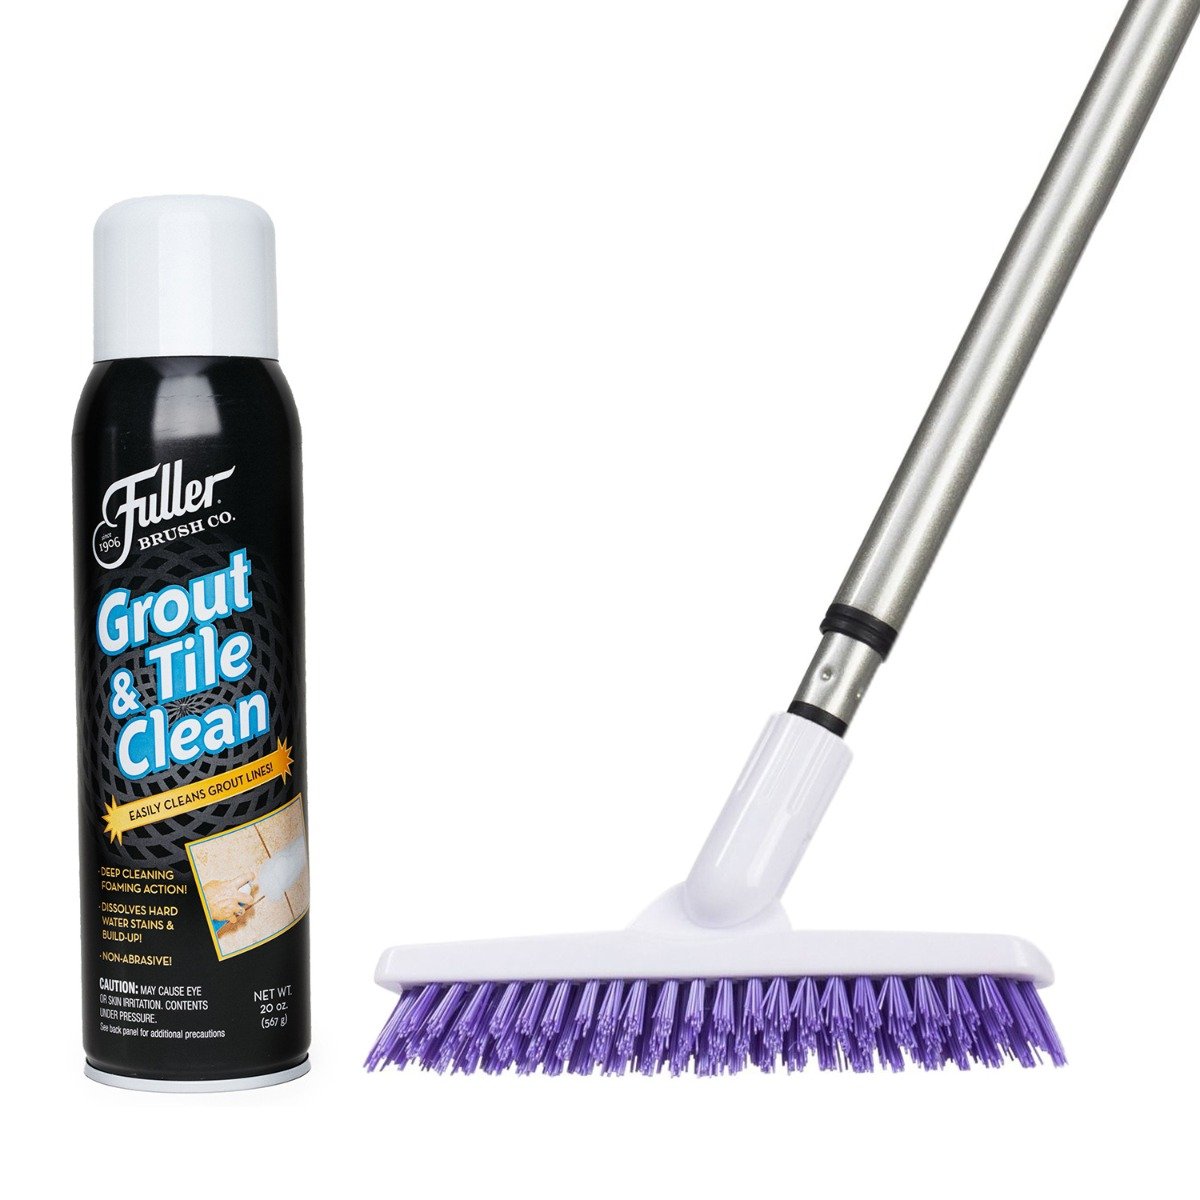 Tile Cleaning & Grout Cleaning — Fuller Brush Company